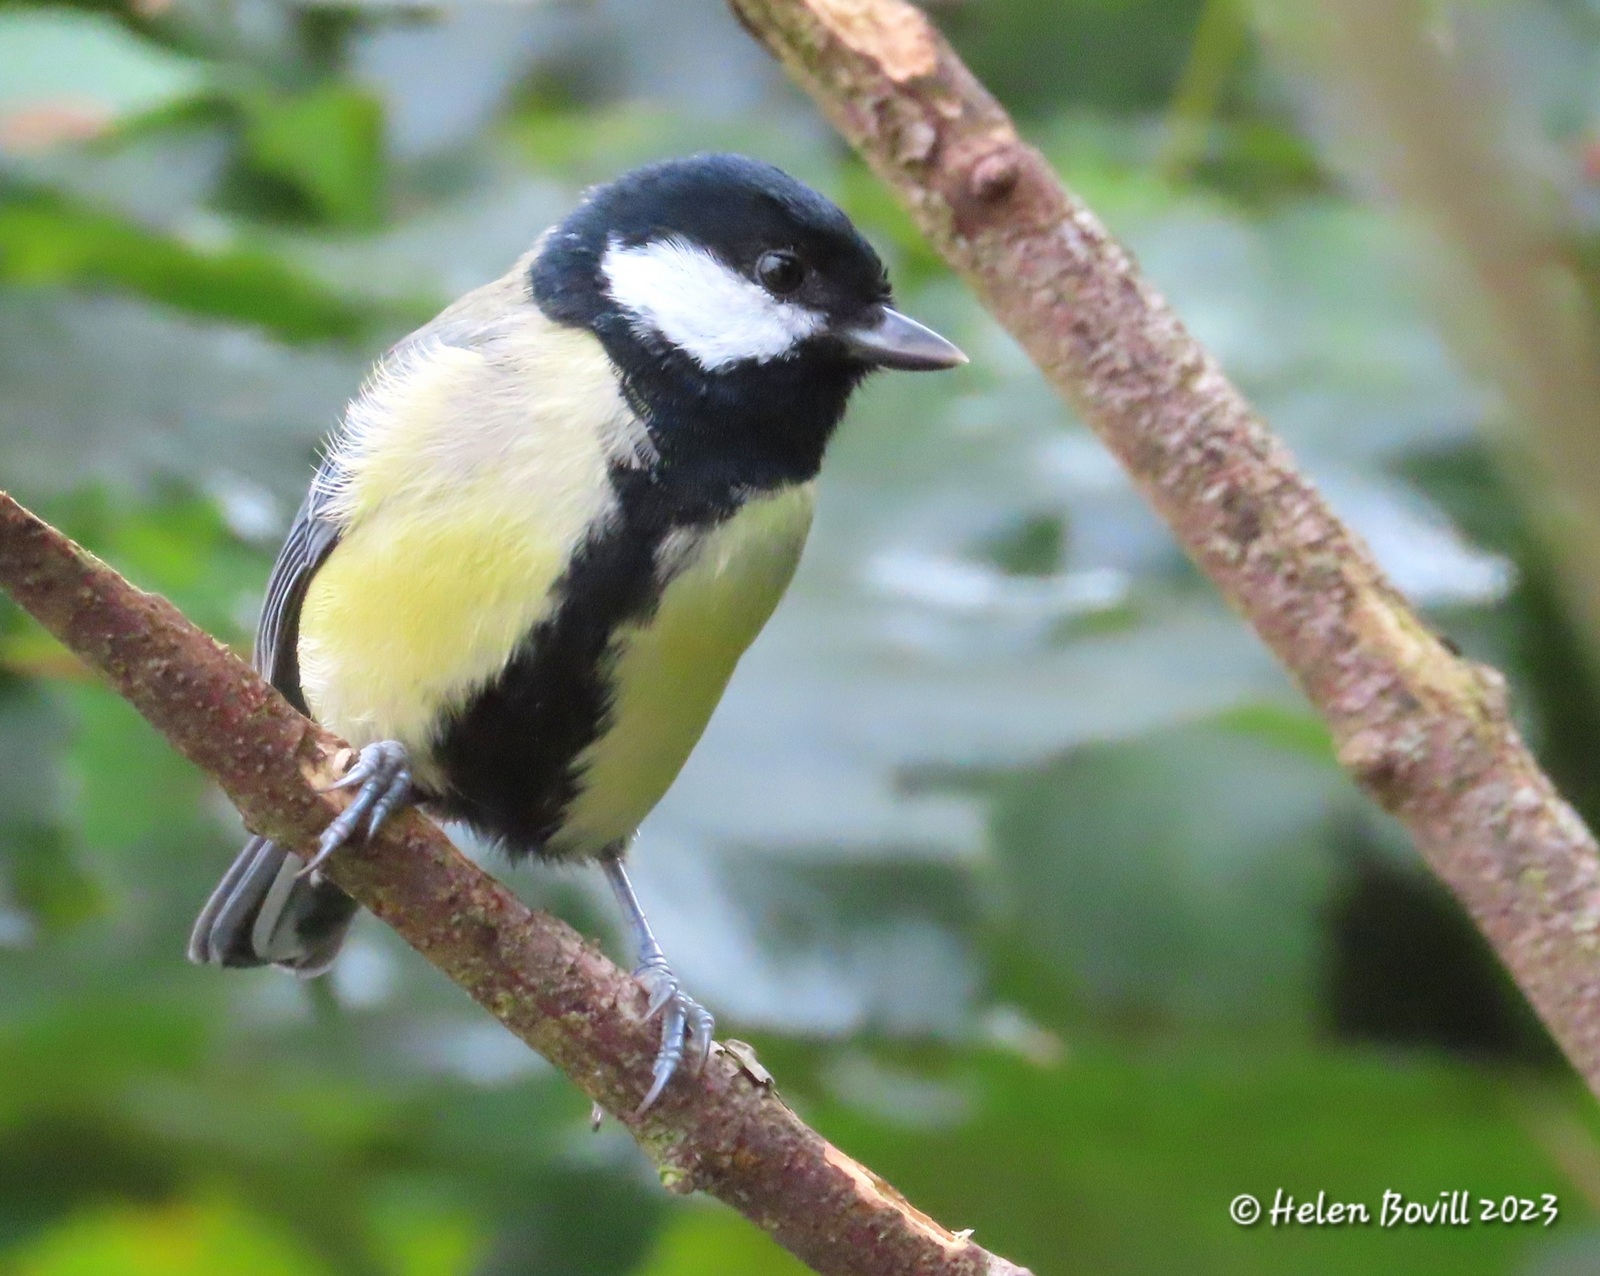 An adult Great Tit in full breeding plumage